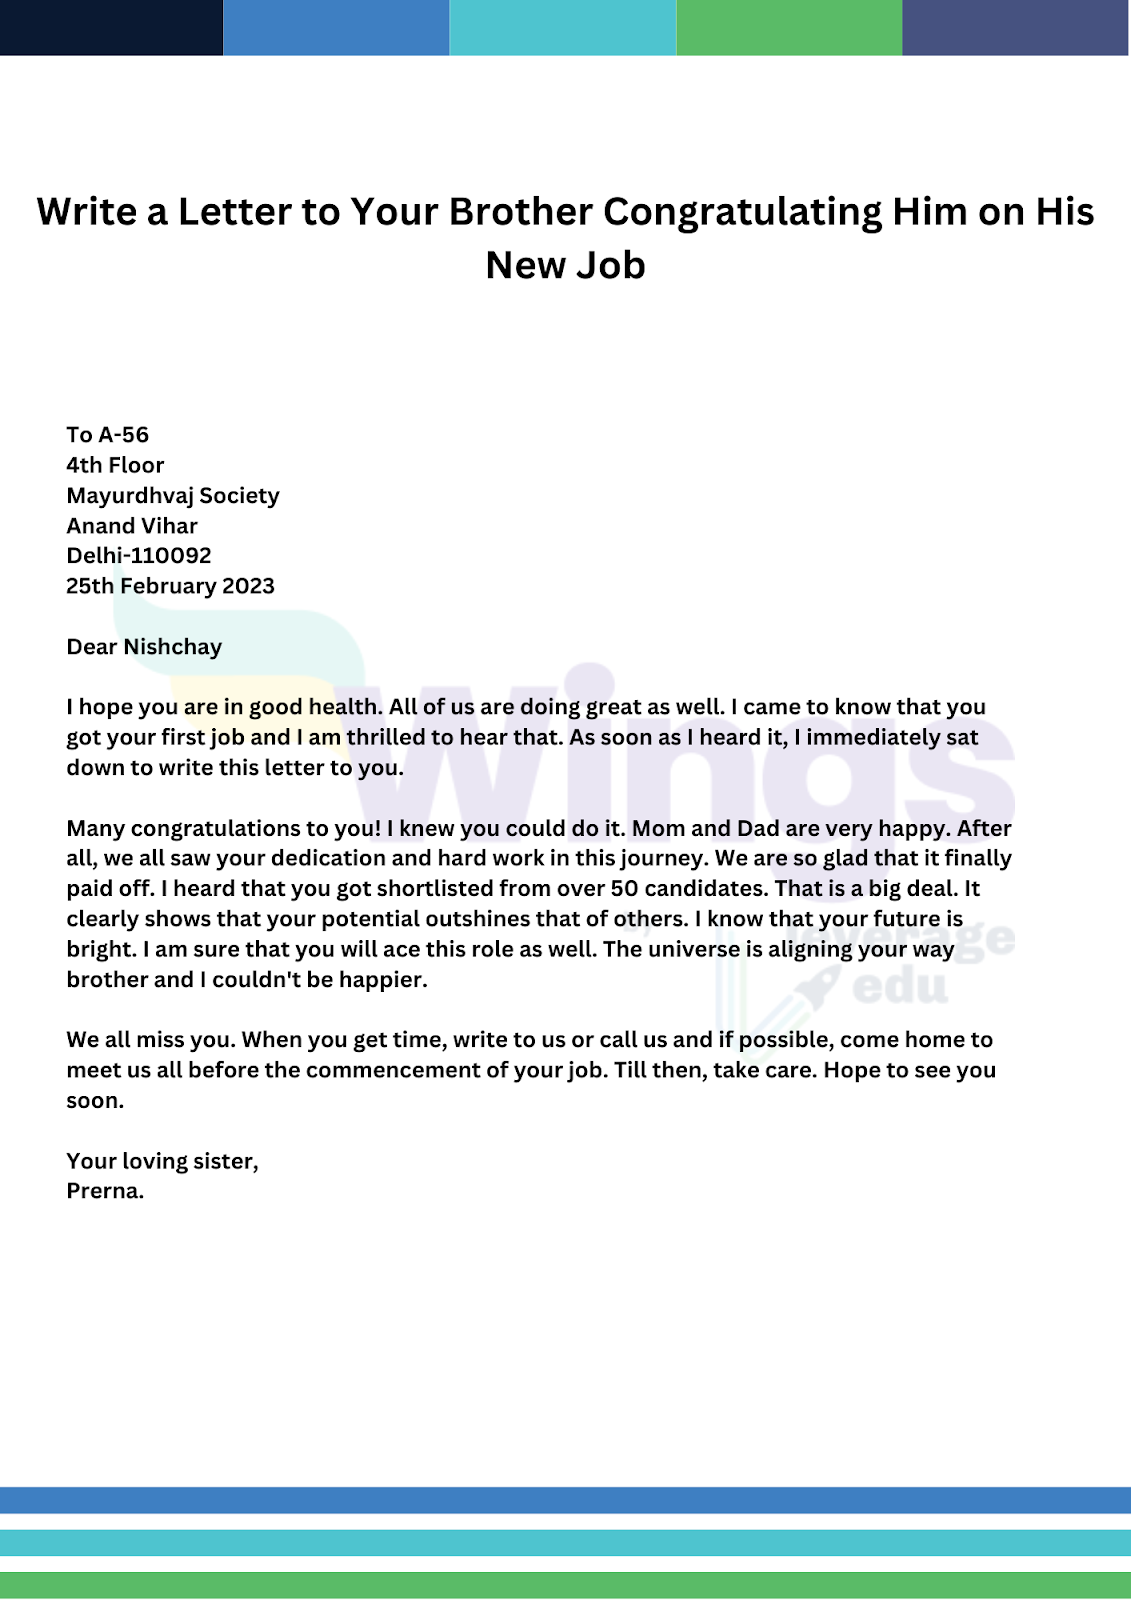 Write a Letter to Your Brother Congratulating Him on His New Job